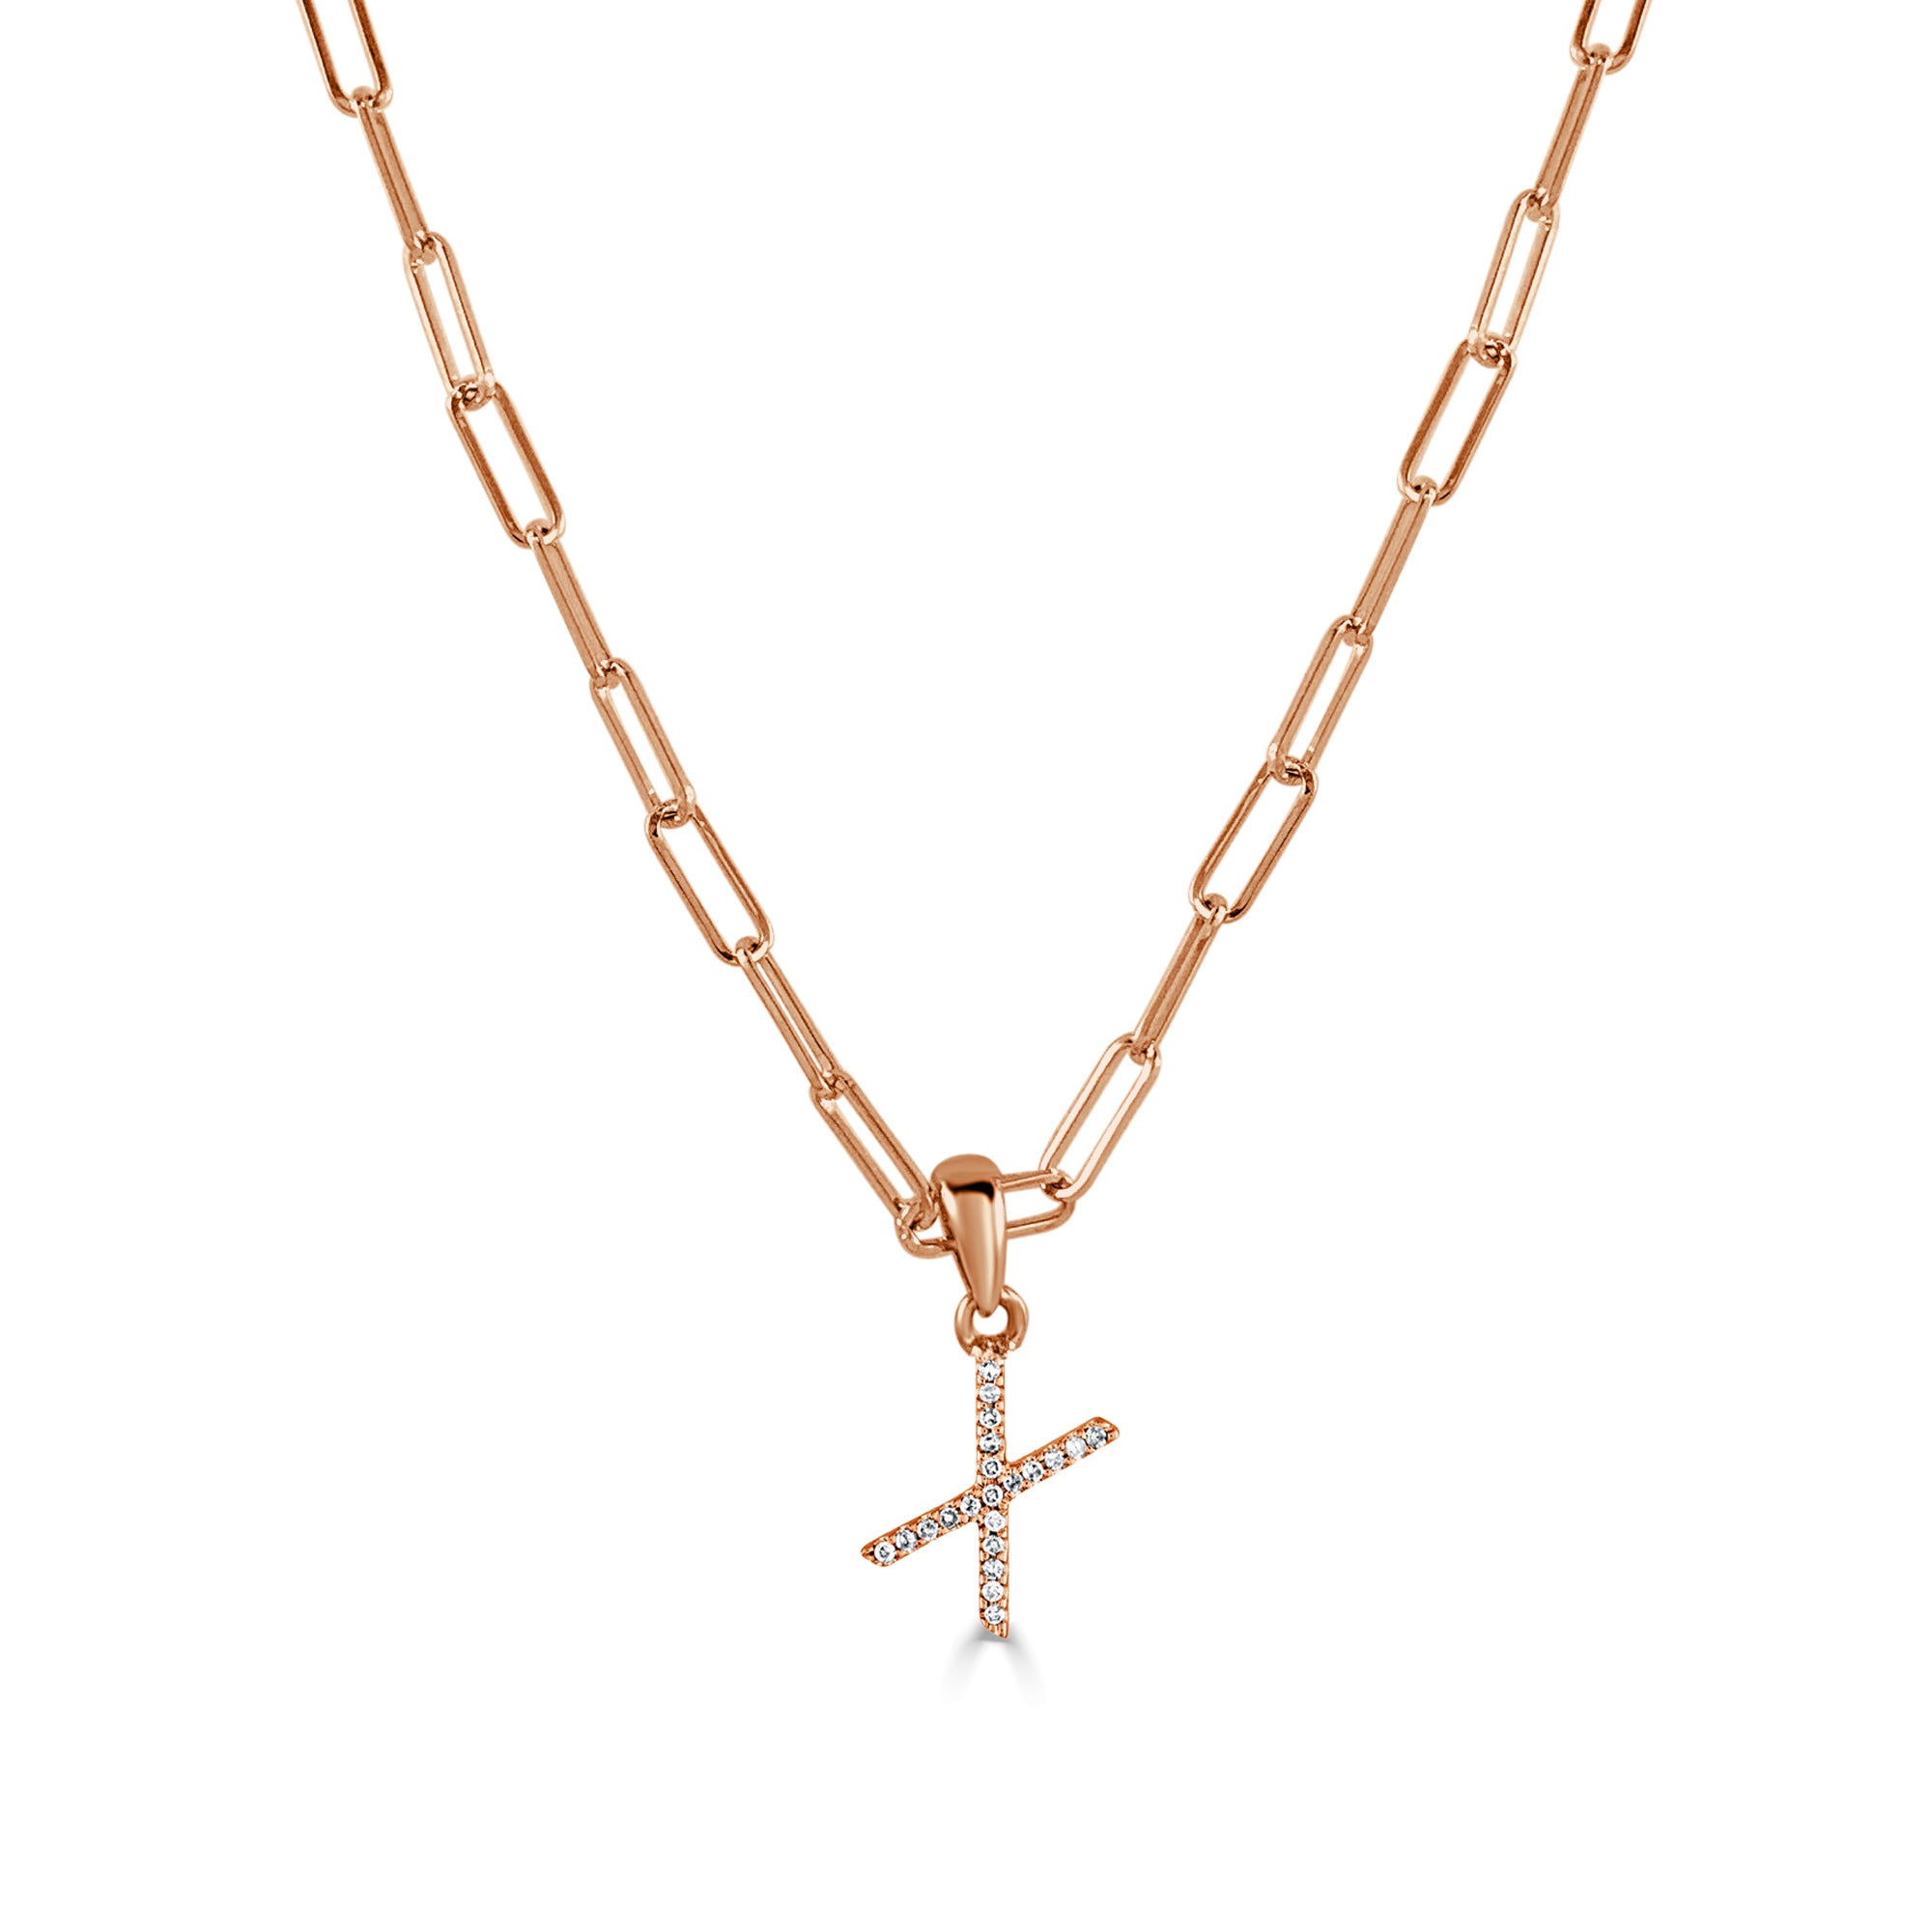 14K Rose Gold Diamond Pad Lock Pendant with 18K Chain by Daniel Creations Jewelry